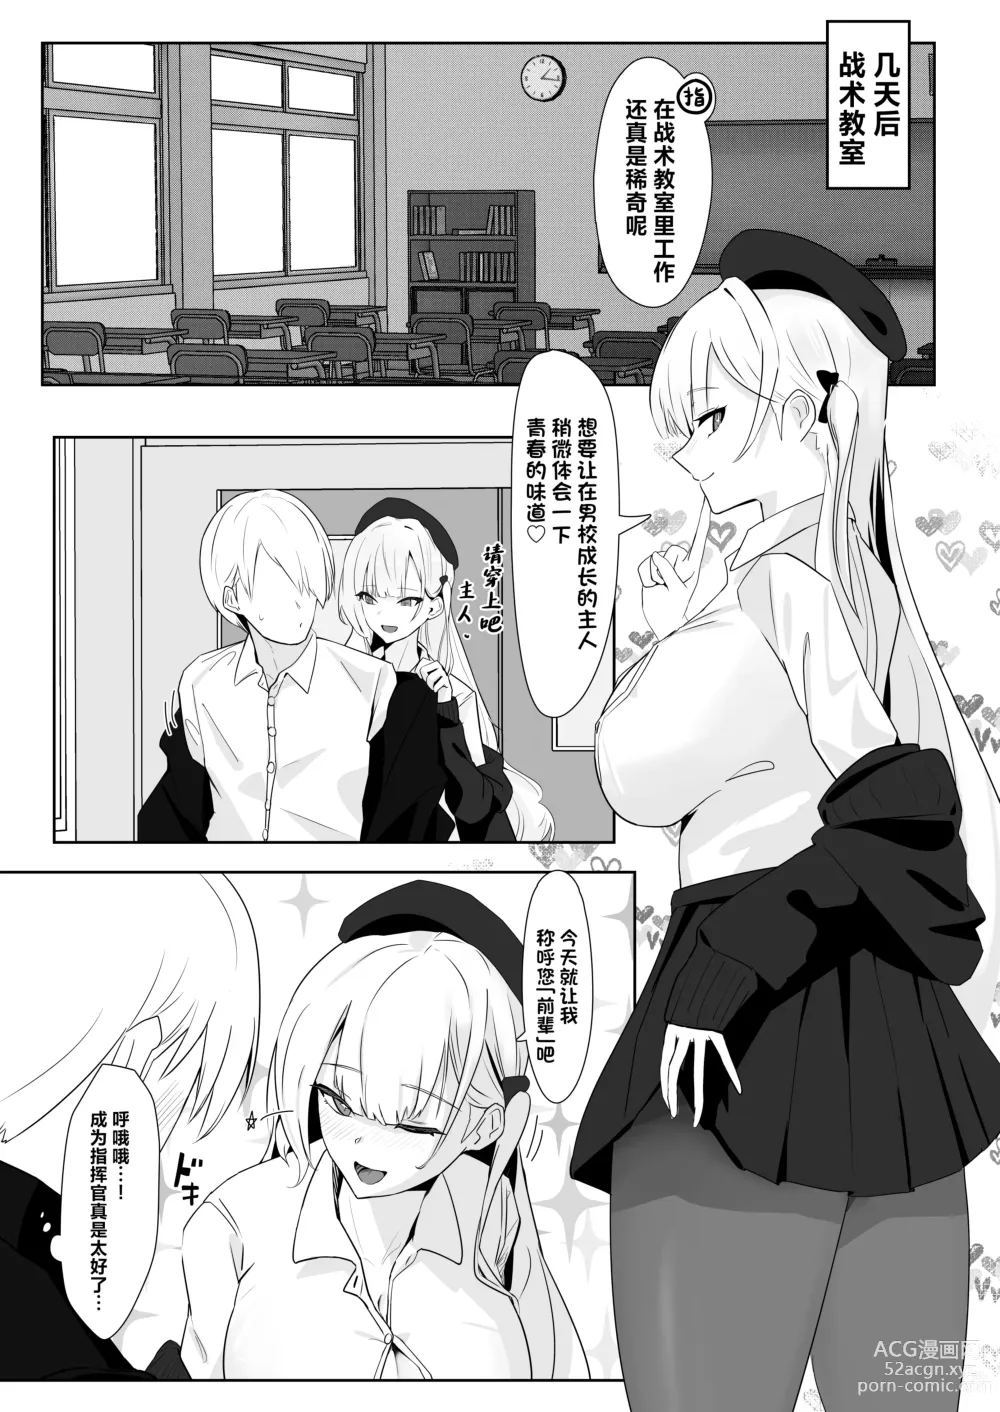 Page 12 of doujinshi 献给你的无上之宝